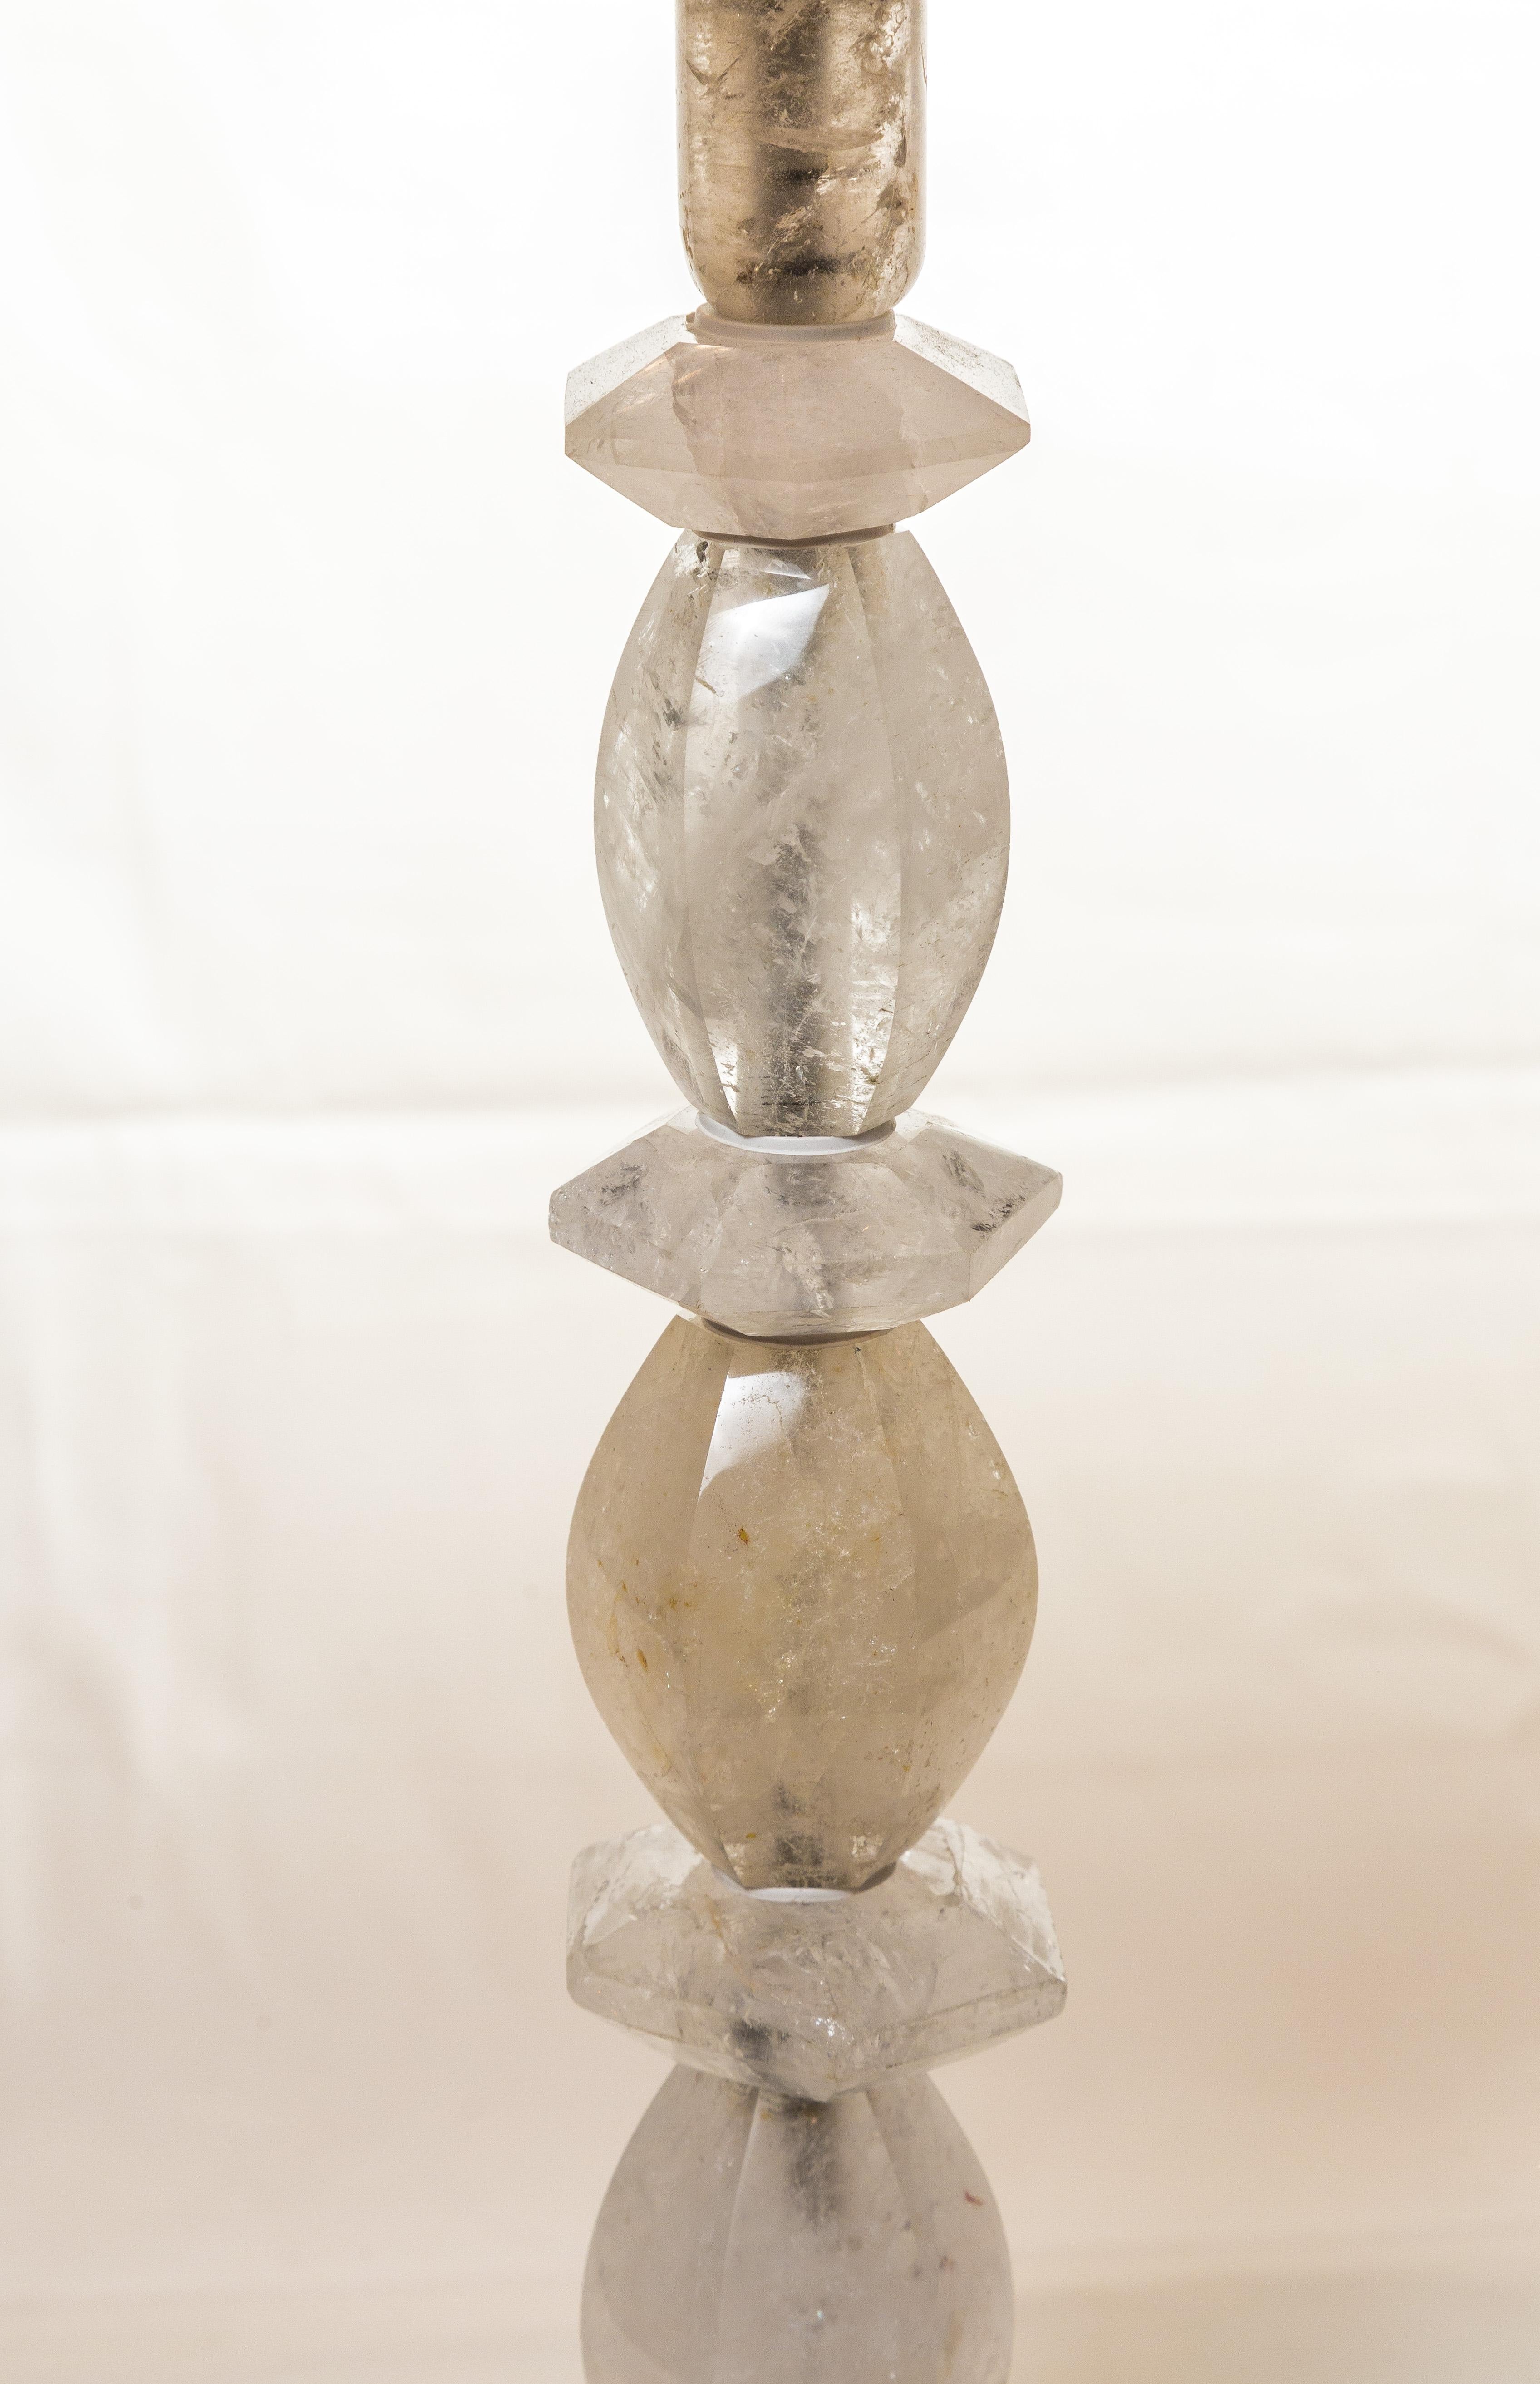 Pair of rock crystal lams, handcrafted from Brazil an excellent quality material, with a 7